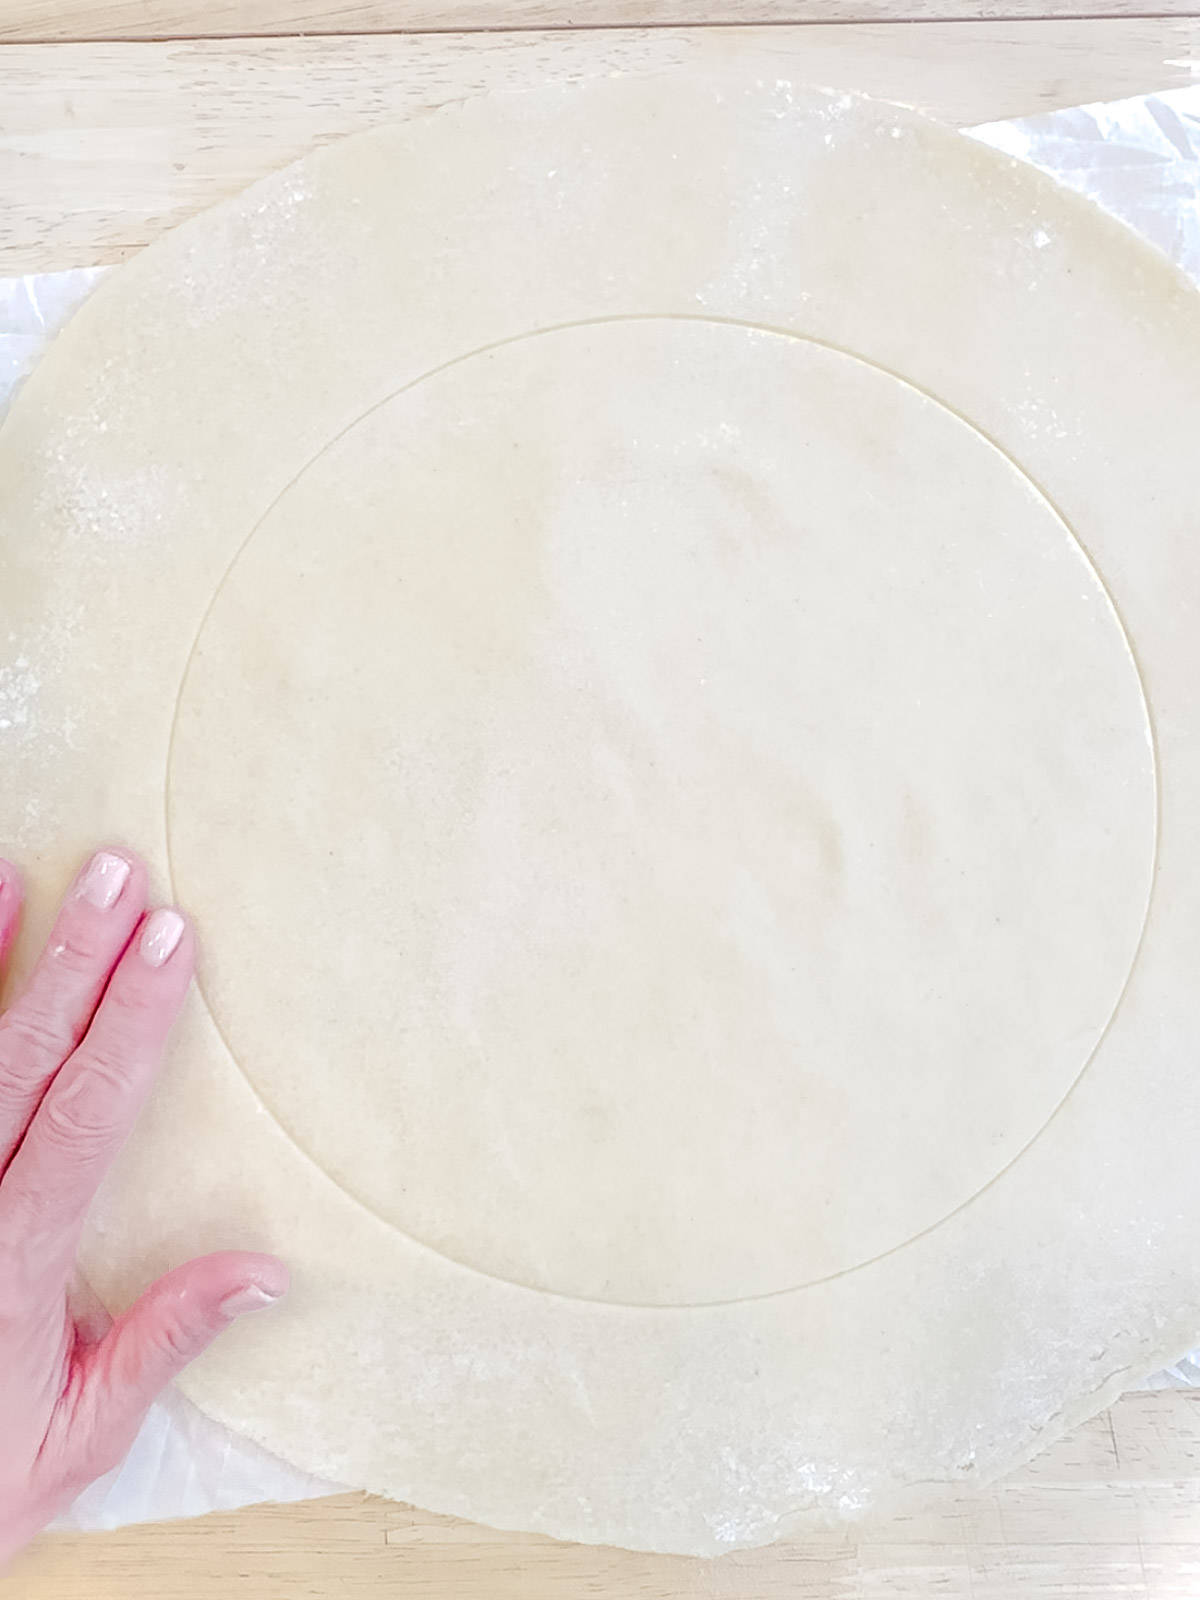 Showing a marked circle for containing fillings on galette crust.